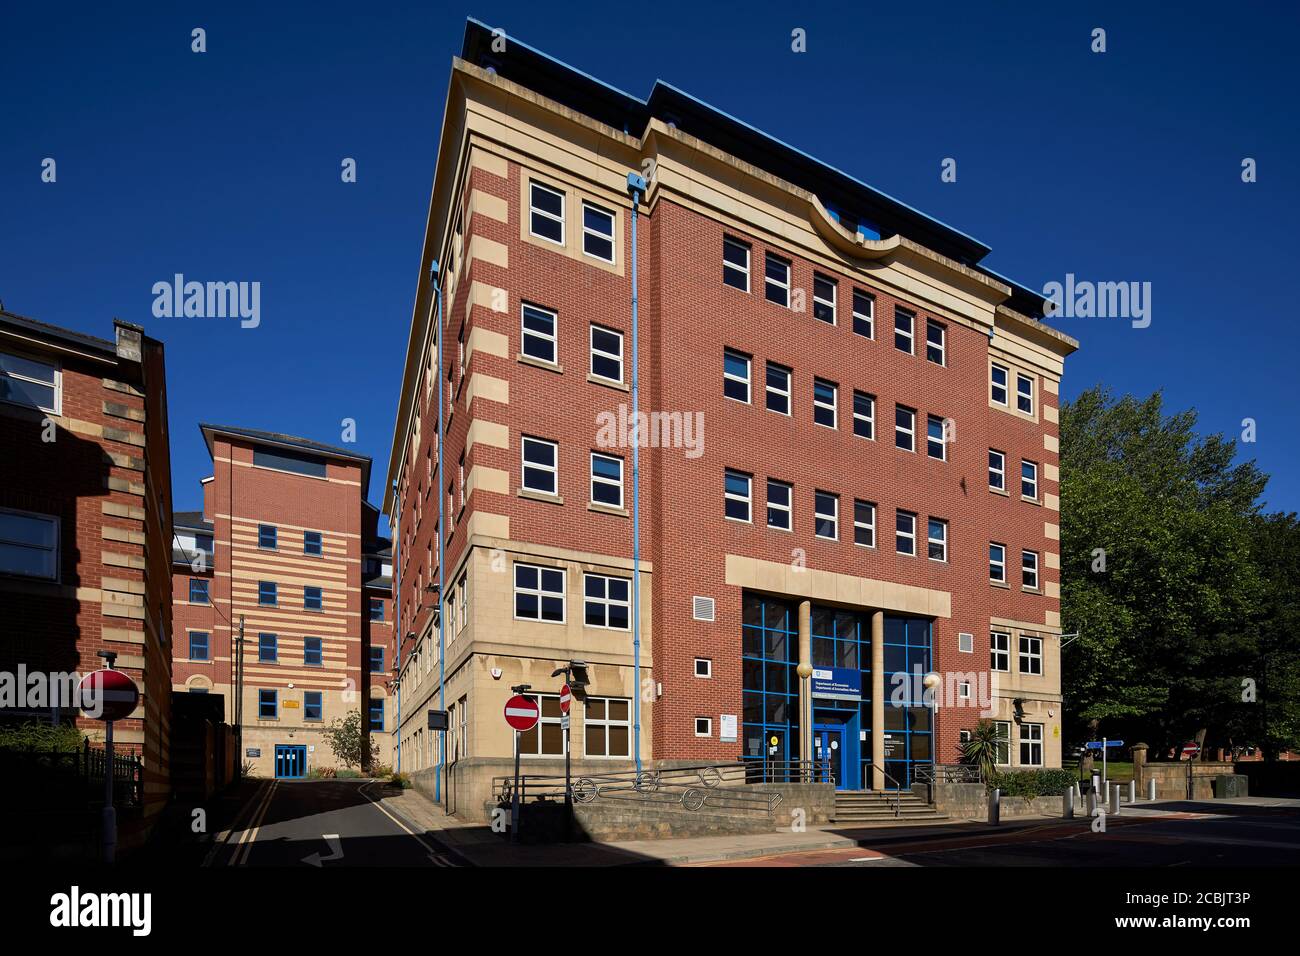 Department of Economics building in the City of Sheffield, England. University of Sheffield Stock Photo